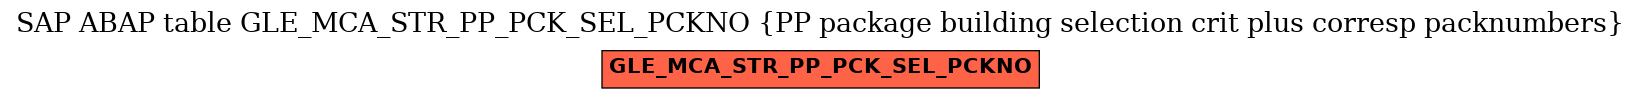 E-R Diagram for table GLE_MCA_STR_PP_PCK_SEL_PCKNO (PP package building selection crit plus corresp packnumbers)